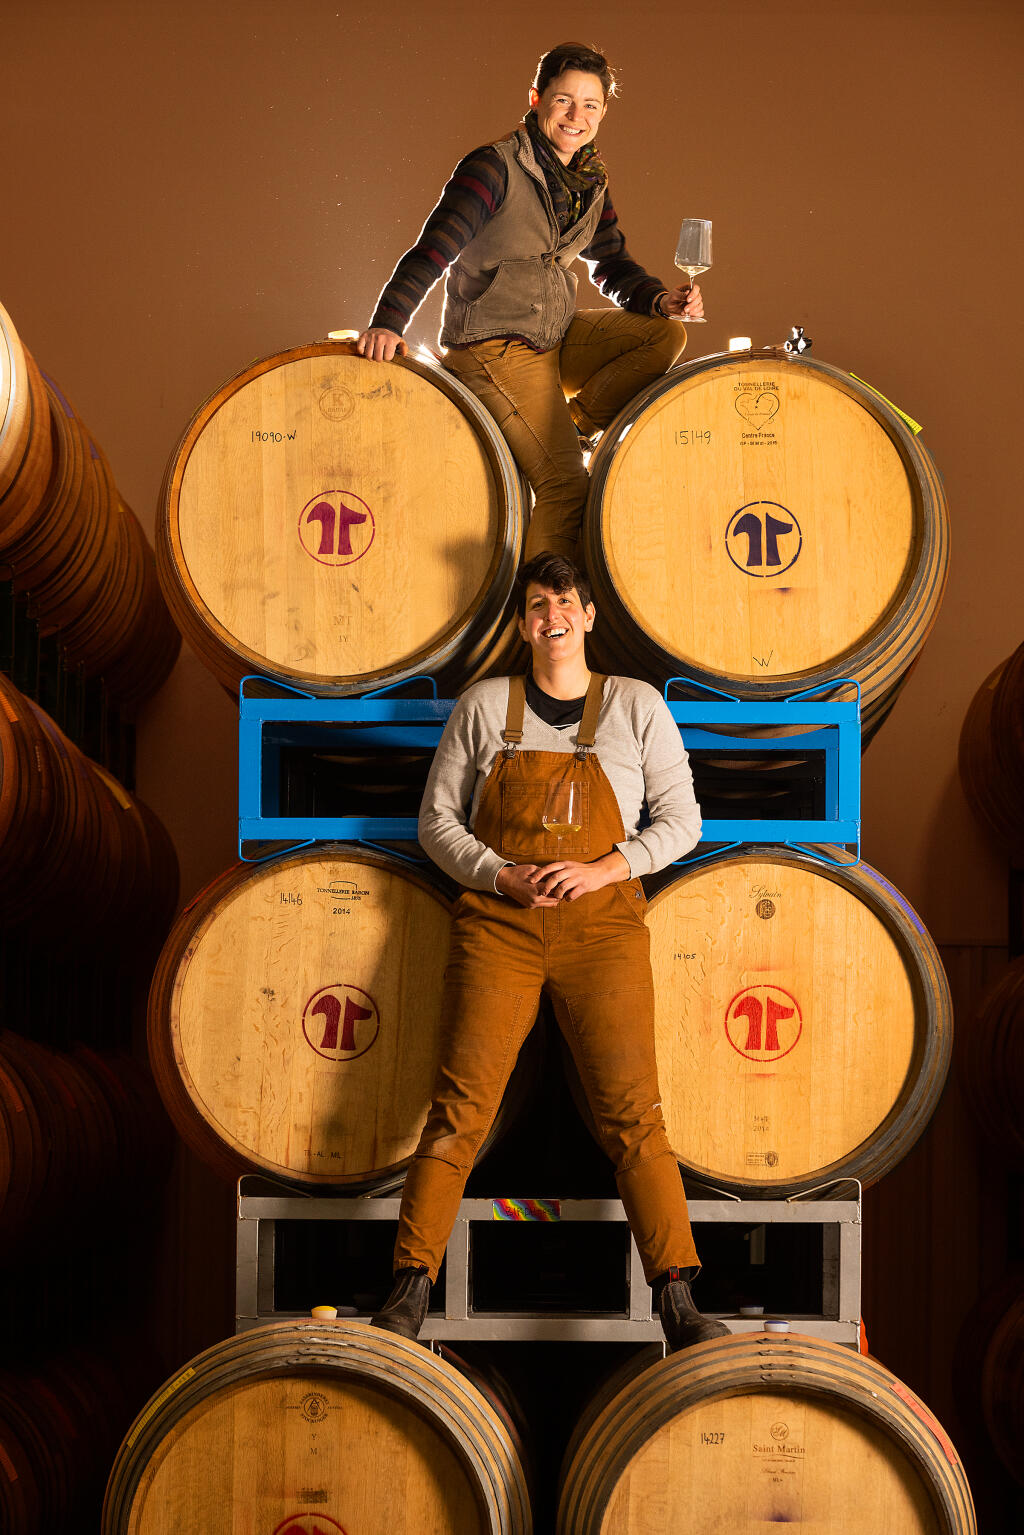 Katie Rouse, a winemaker with Bedrock Wine Co., top, and Corrine Rich, a winemaker with Scribe are life partners and partners in Birdhorse Wines, a small passion project produced in a Sonoma warehouse, Wednesday, Dec. 7, 2022. (John Burgess / The Press Democrat file)